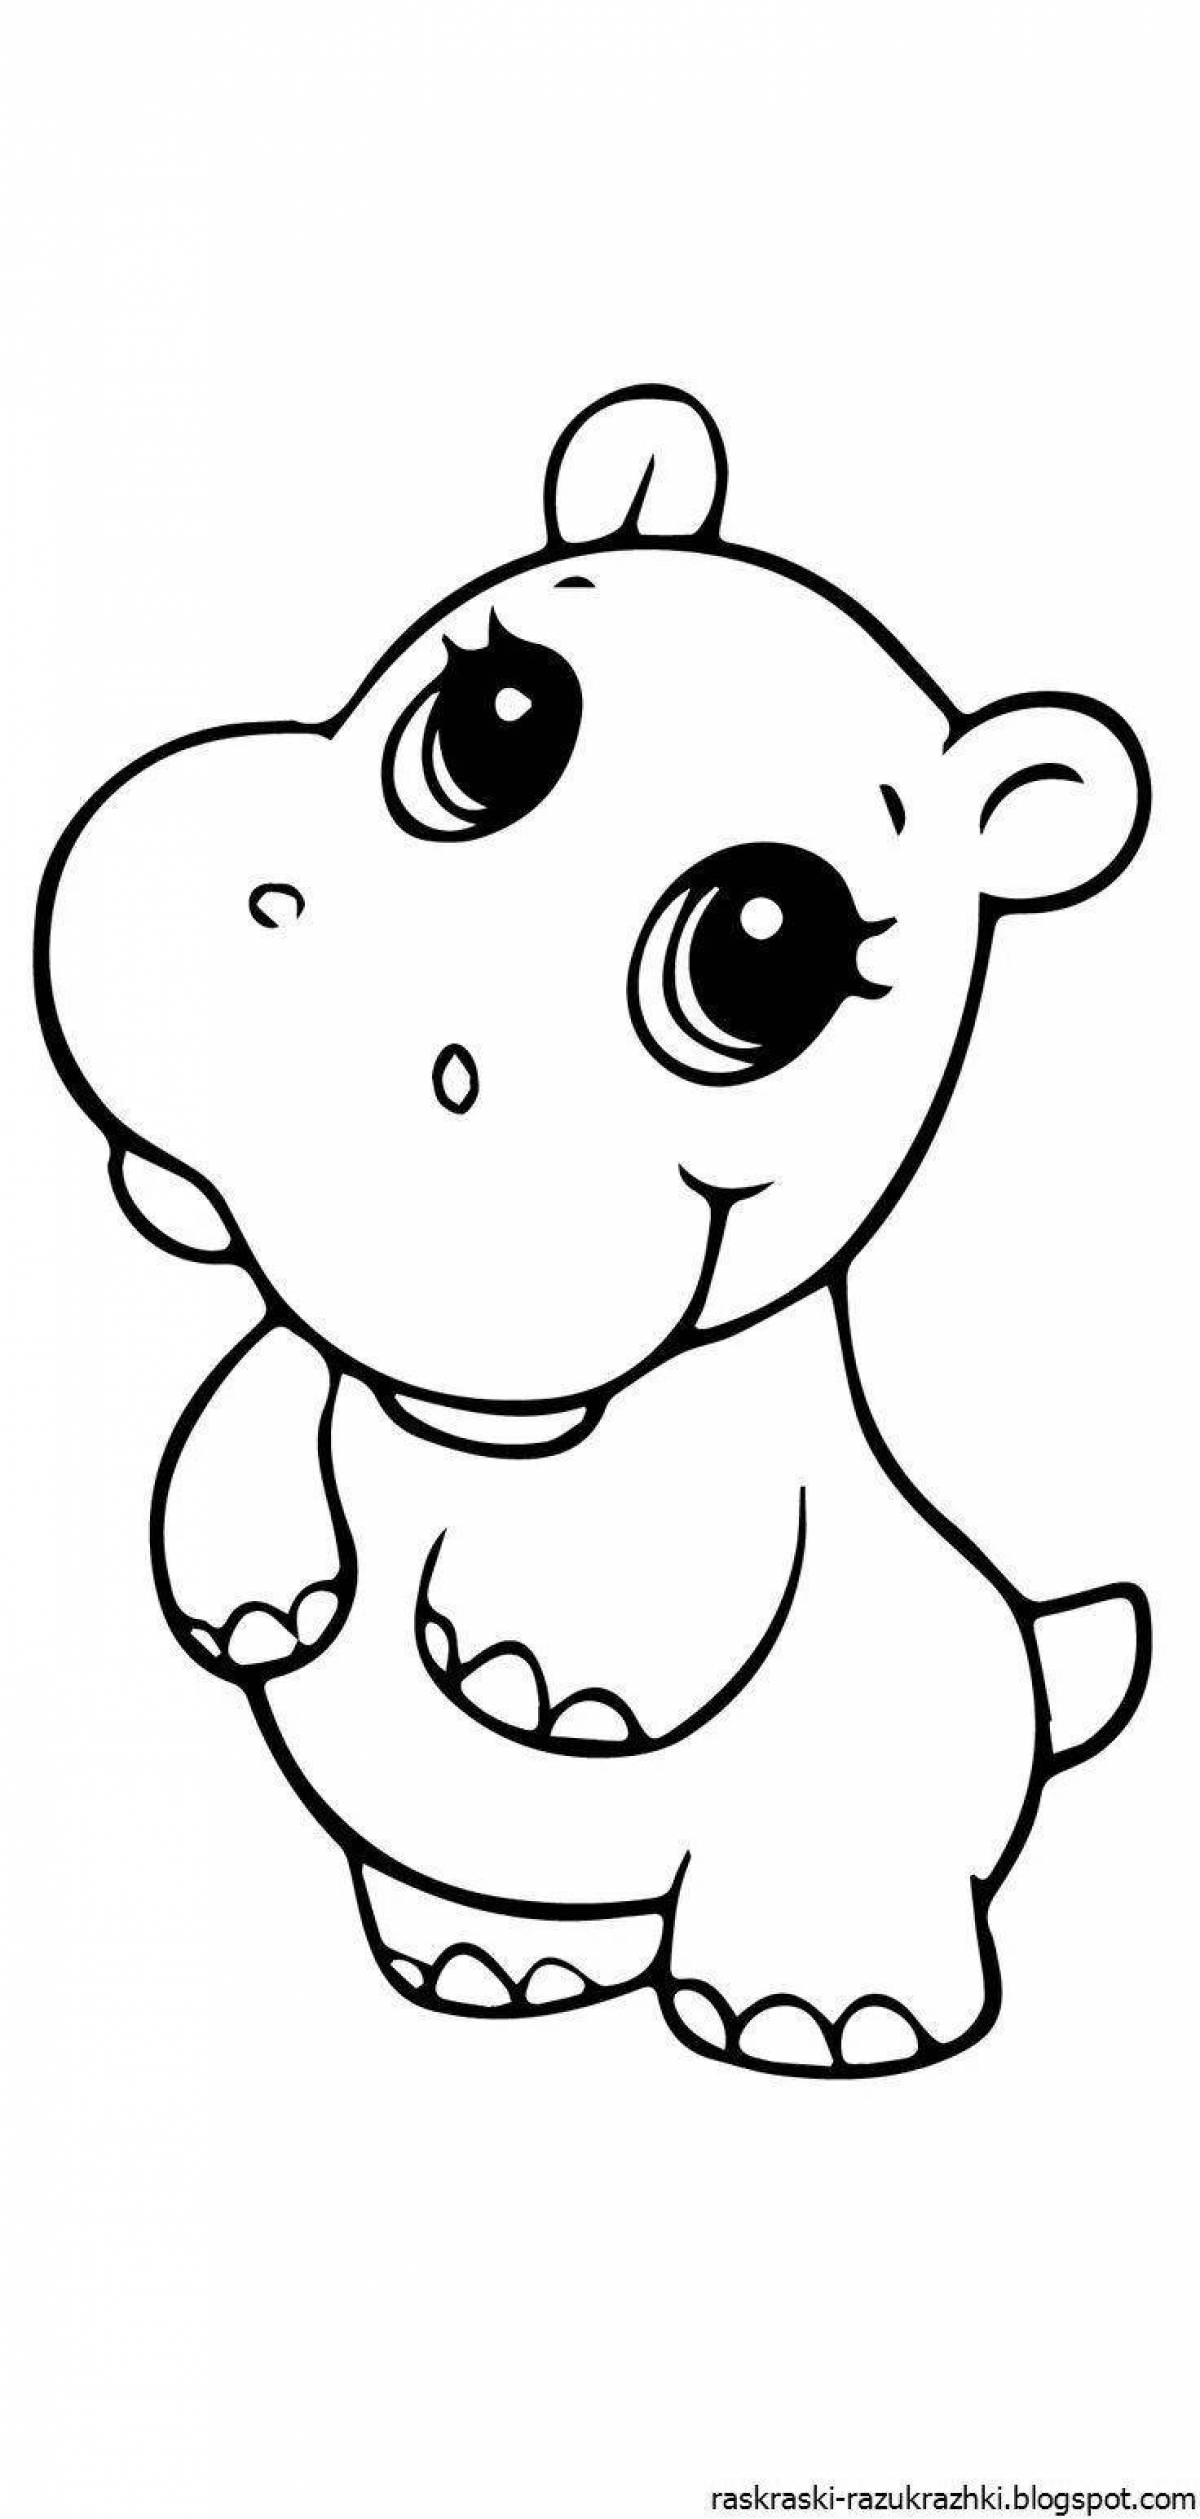 Furry animal coloring pages